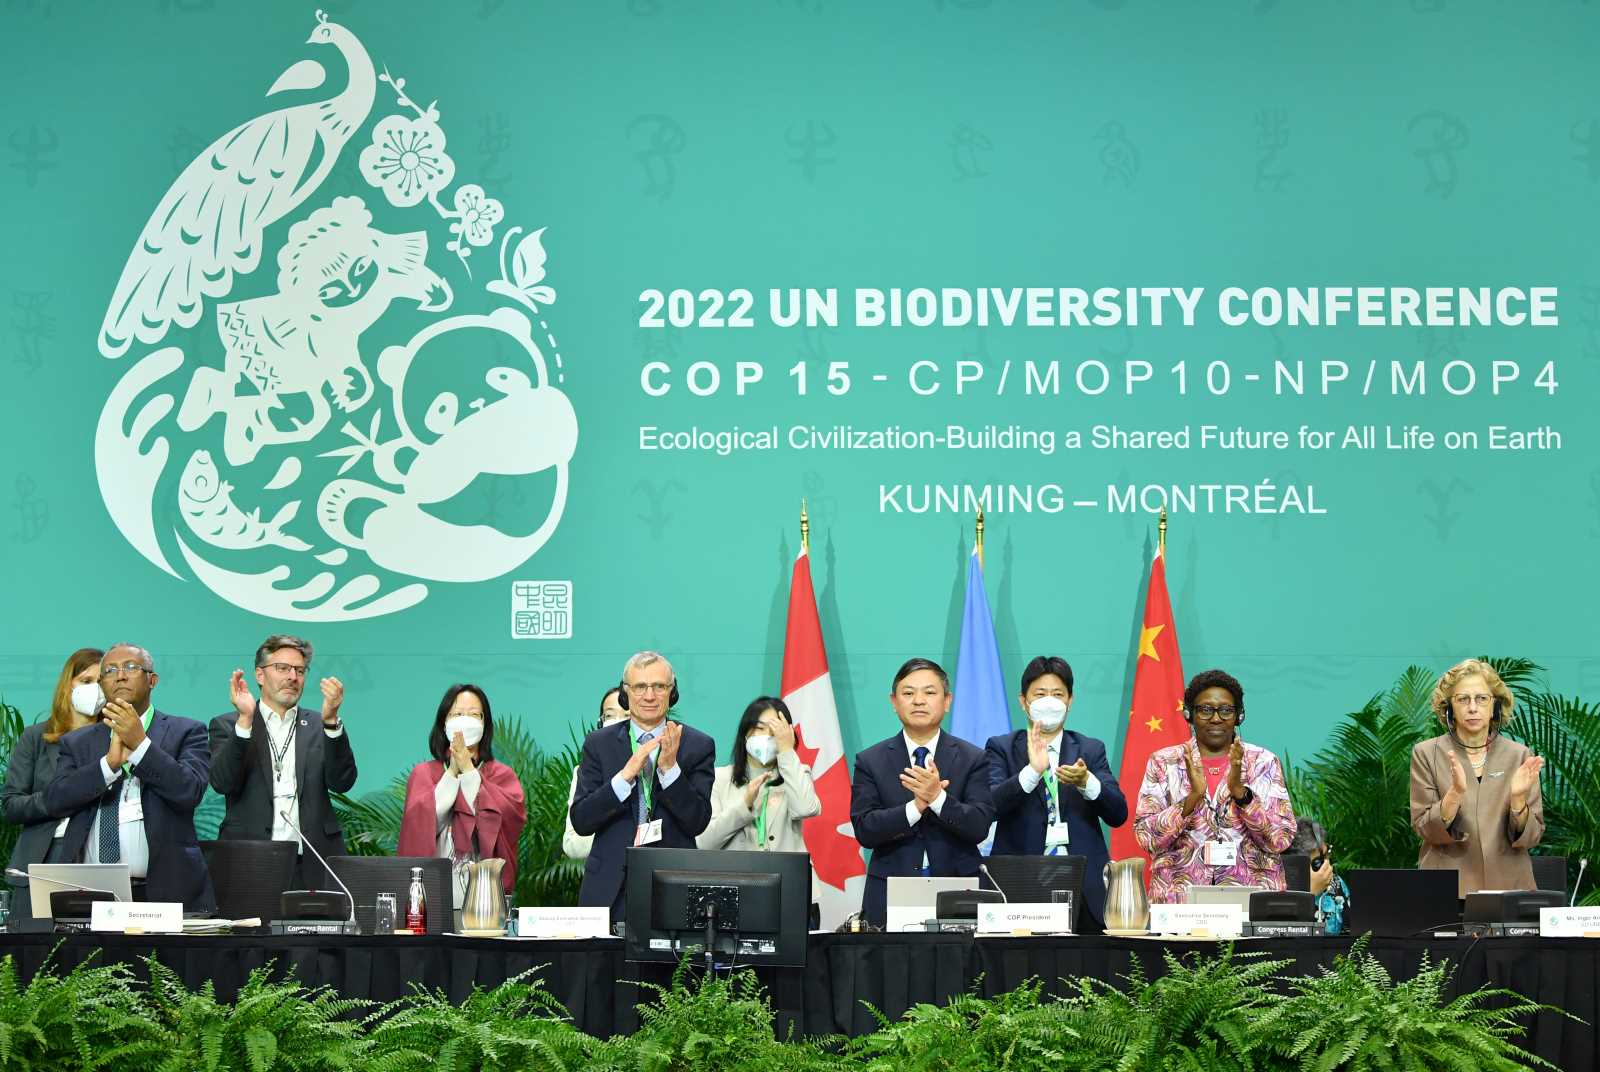 In the end, the delegates of COP15 succeeded in adopting the Kunming-Montreal Global Biodiversity Framework. 